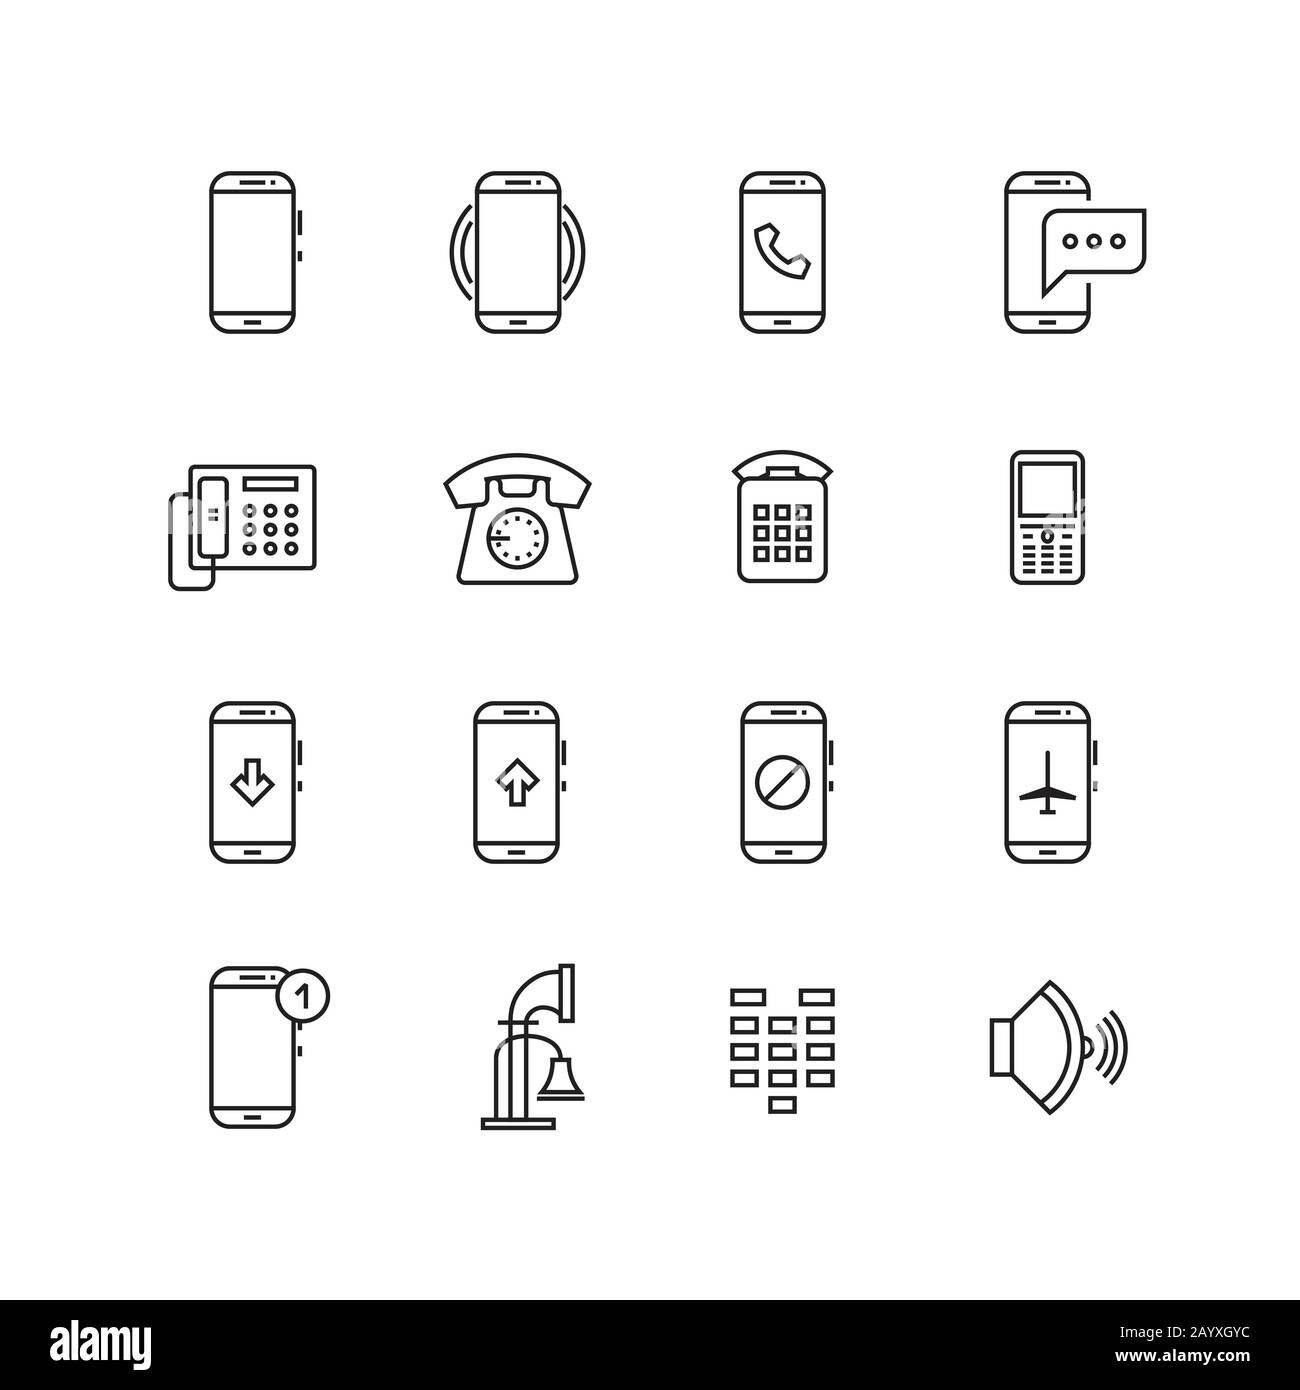 Phone, telephone, smartphone devices and communication vector line icons. Phone smartphone and mobile phone communication, device technology illustration Stock Vector